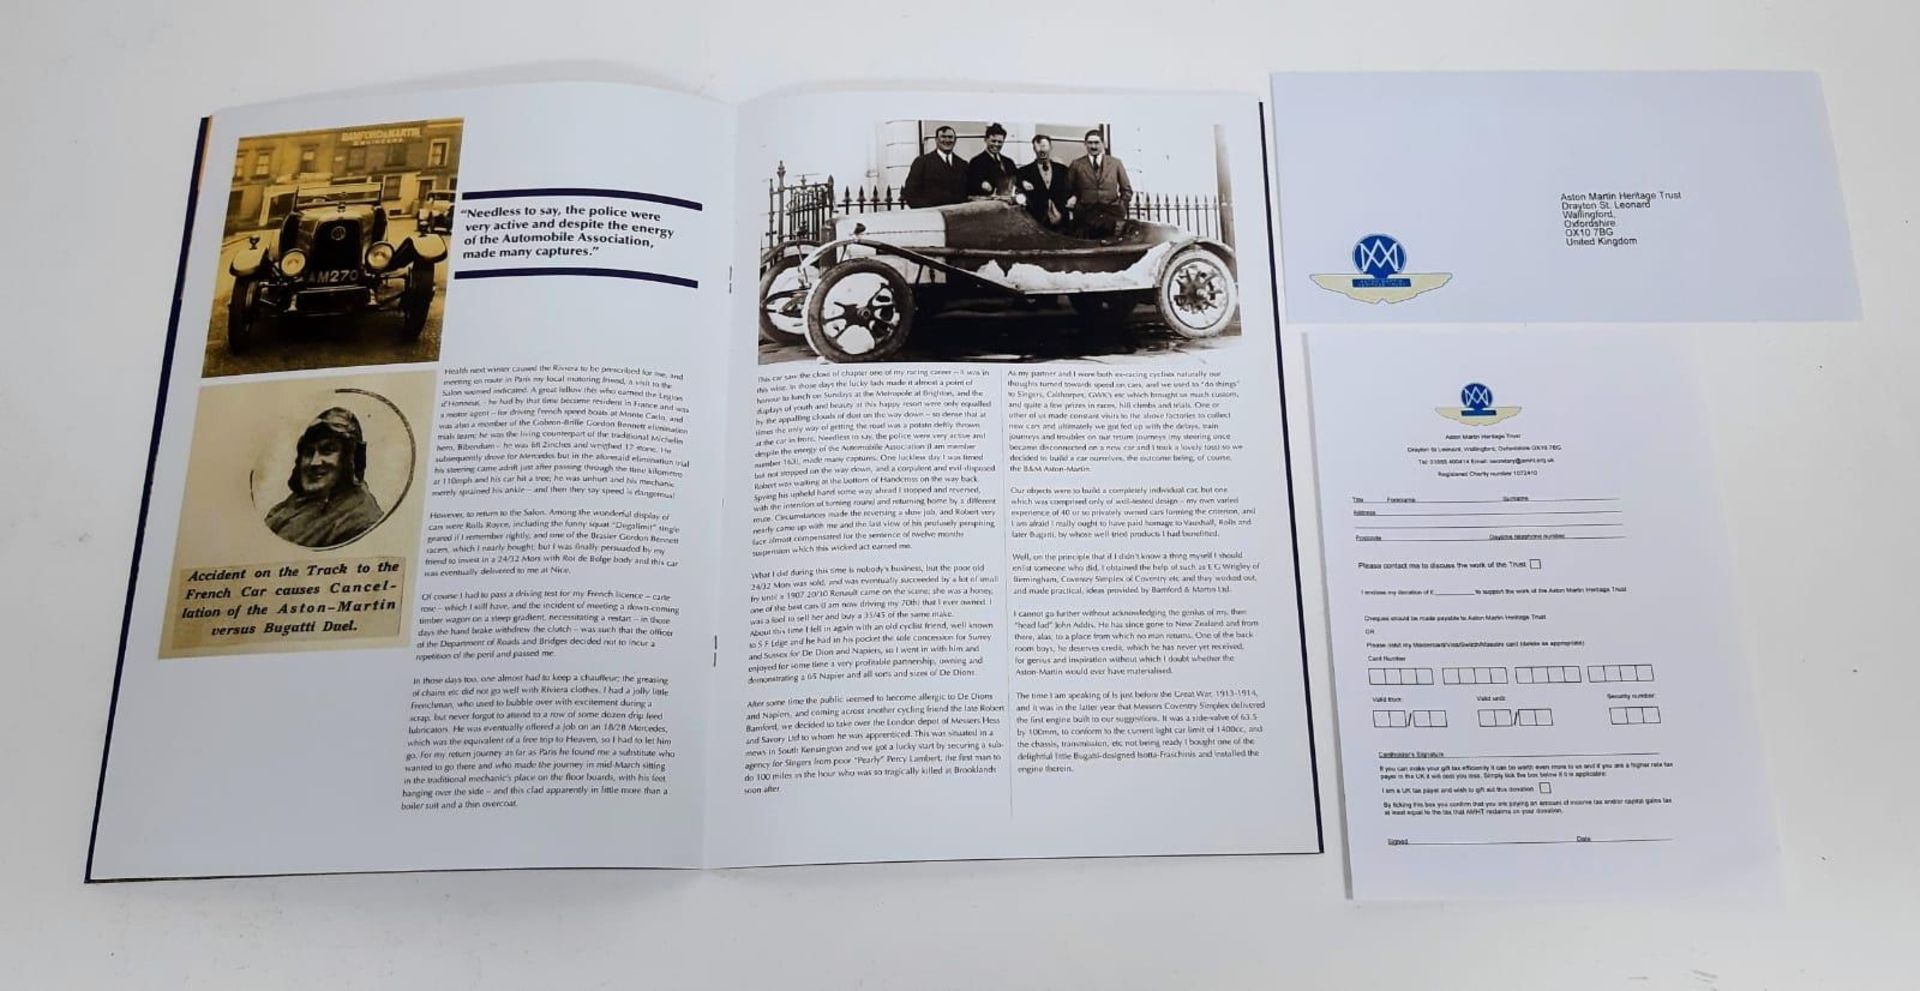 A celebration of 100th Anniversary of Aston Martin 1913-2013. Programme in immaculate condition - Image 4 of 4